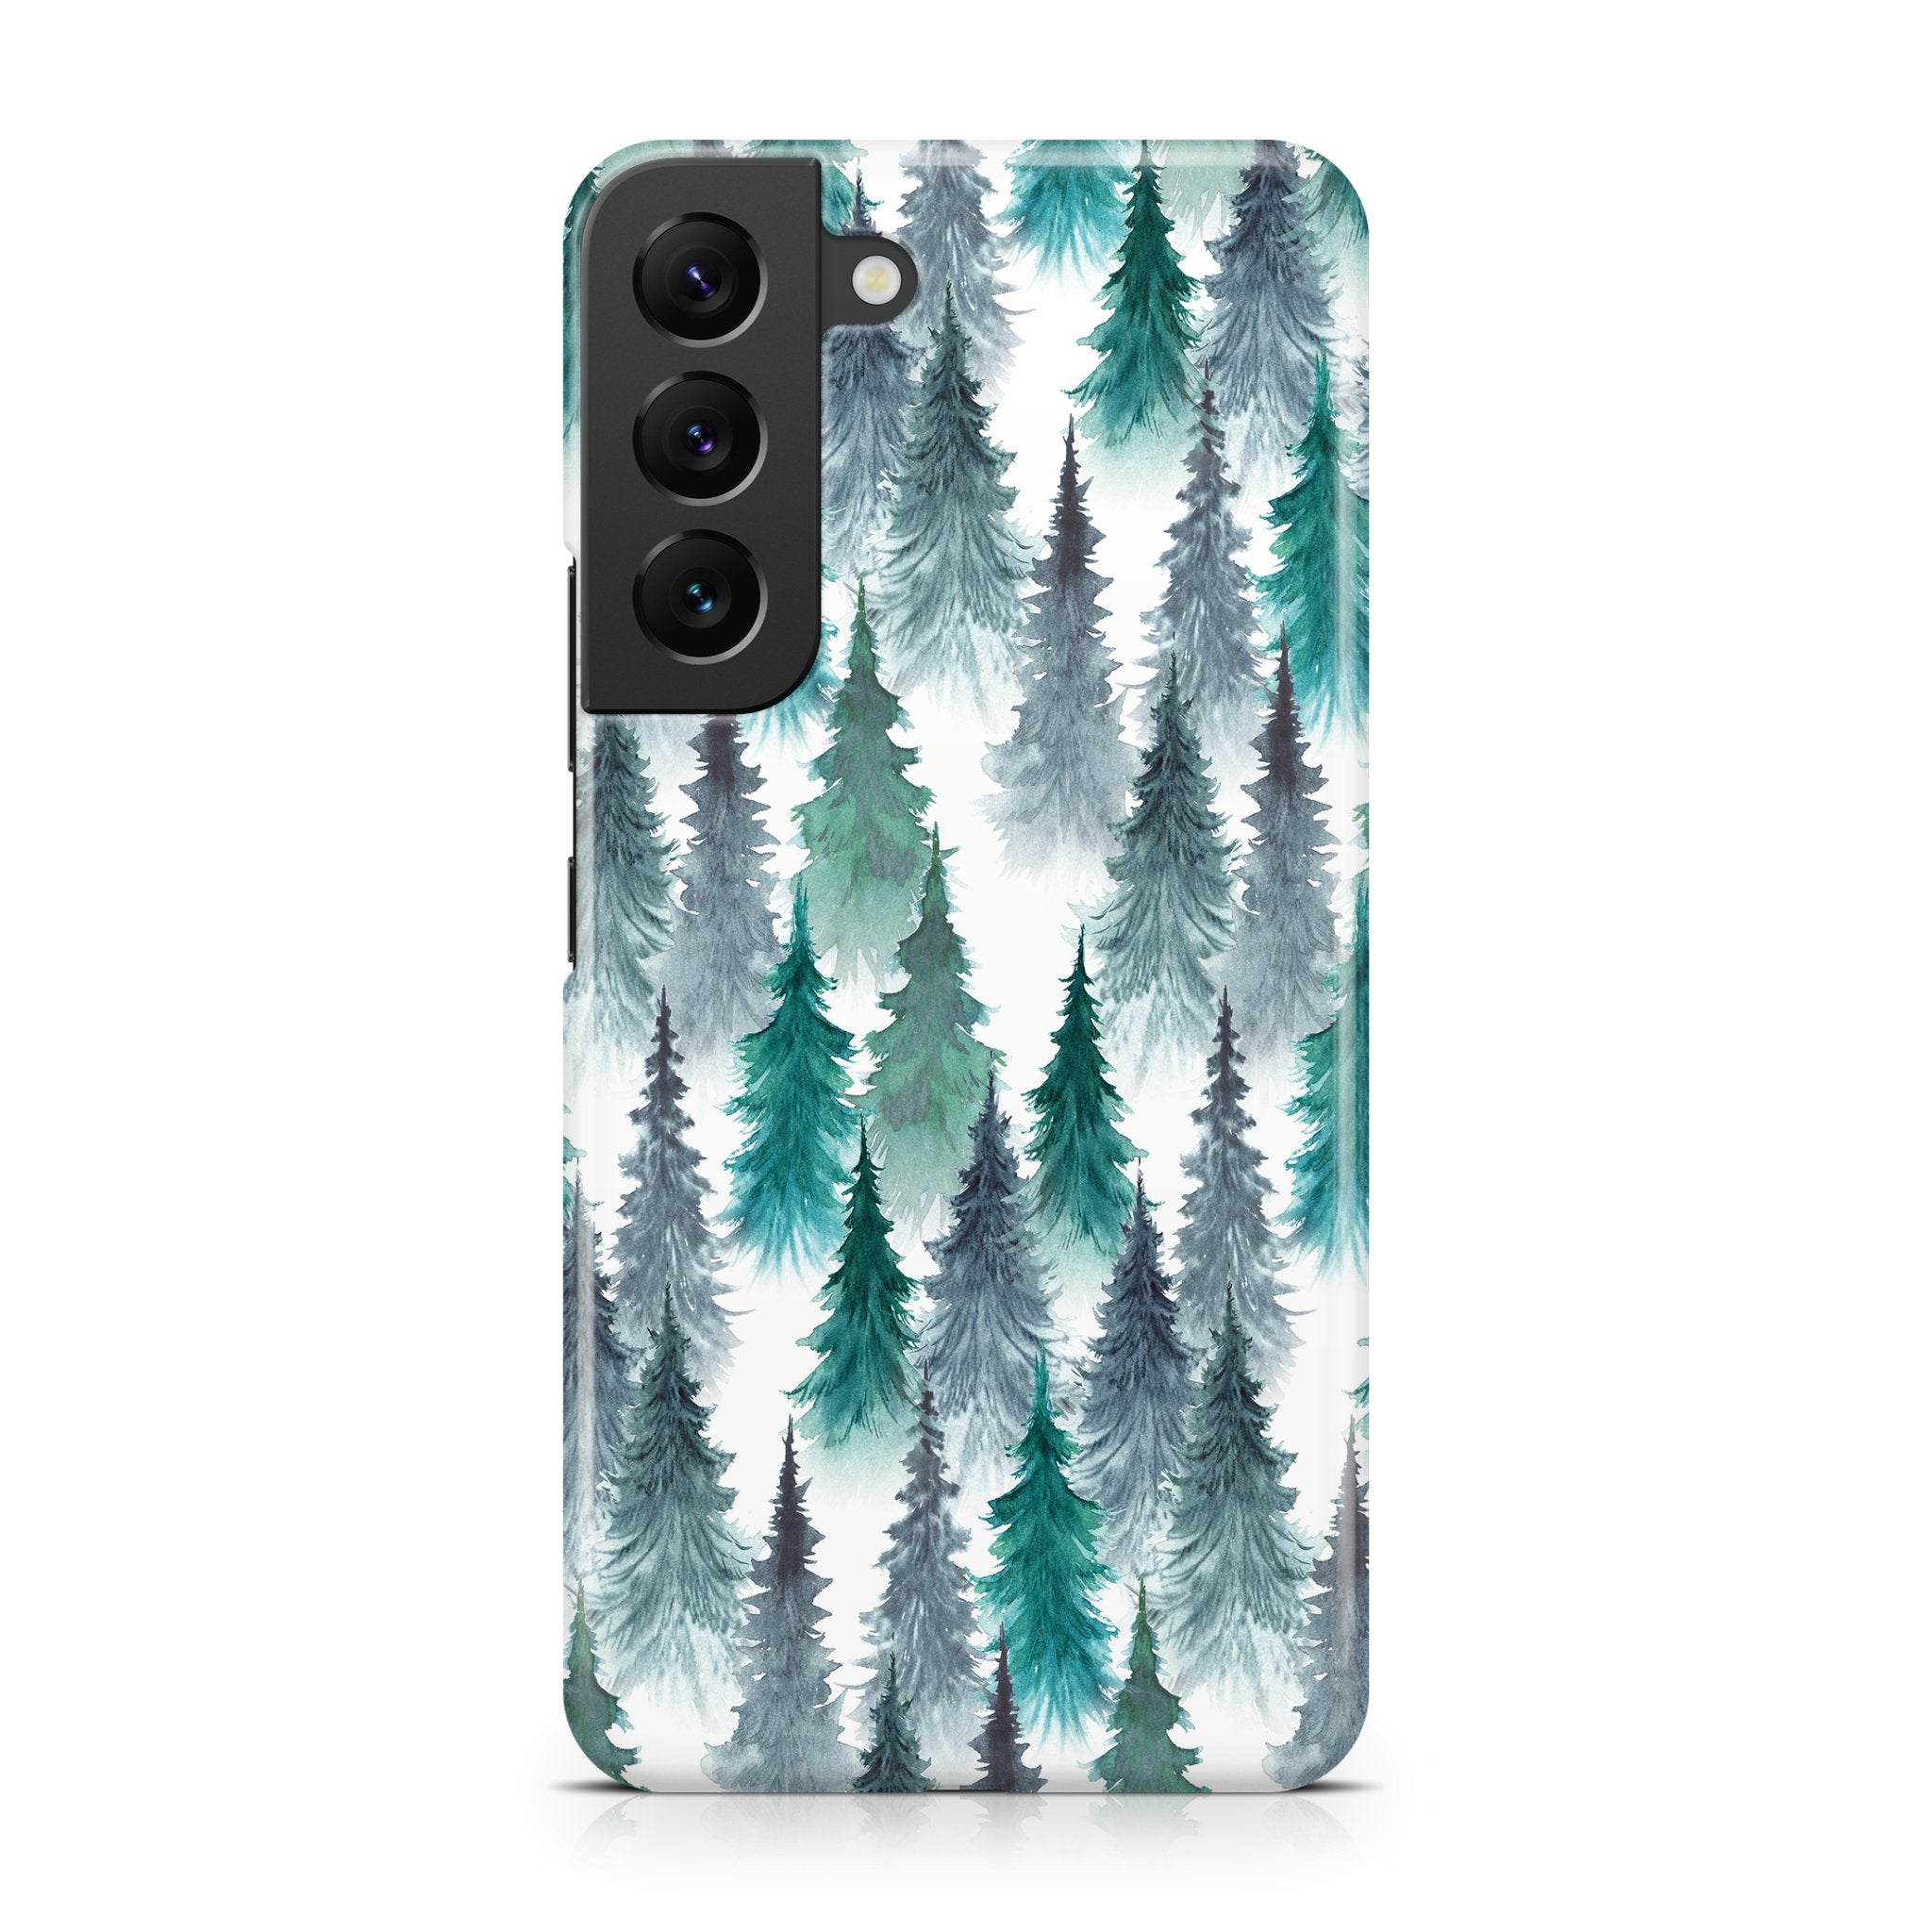 Winter Forest III - Samsung phone case designs by CaseSwagger